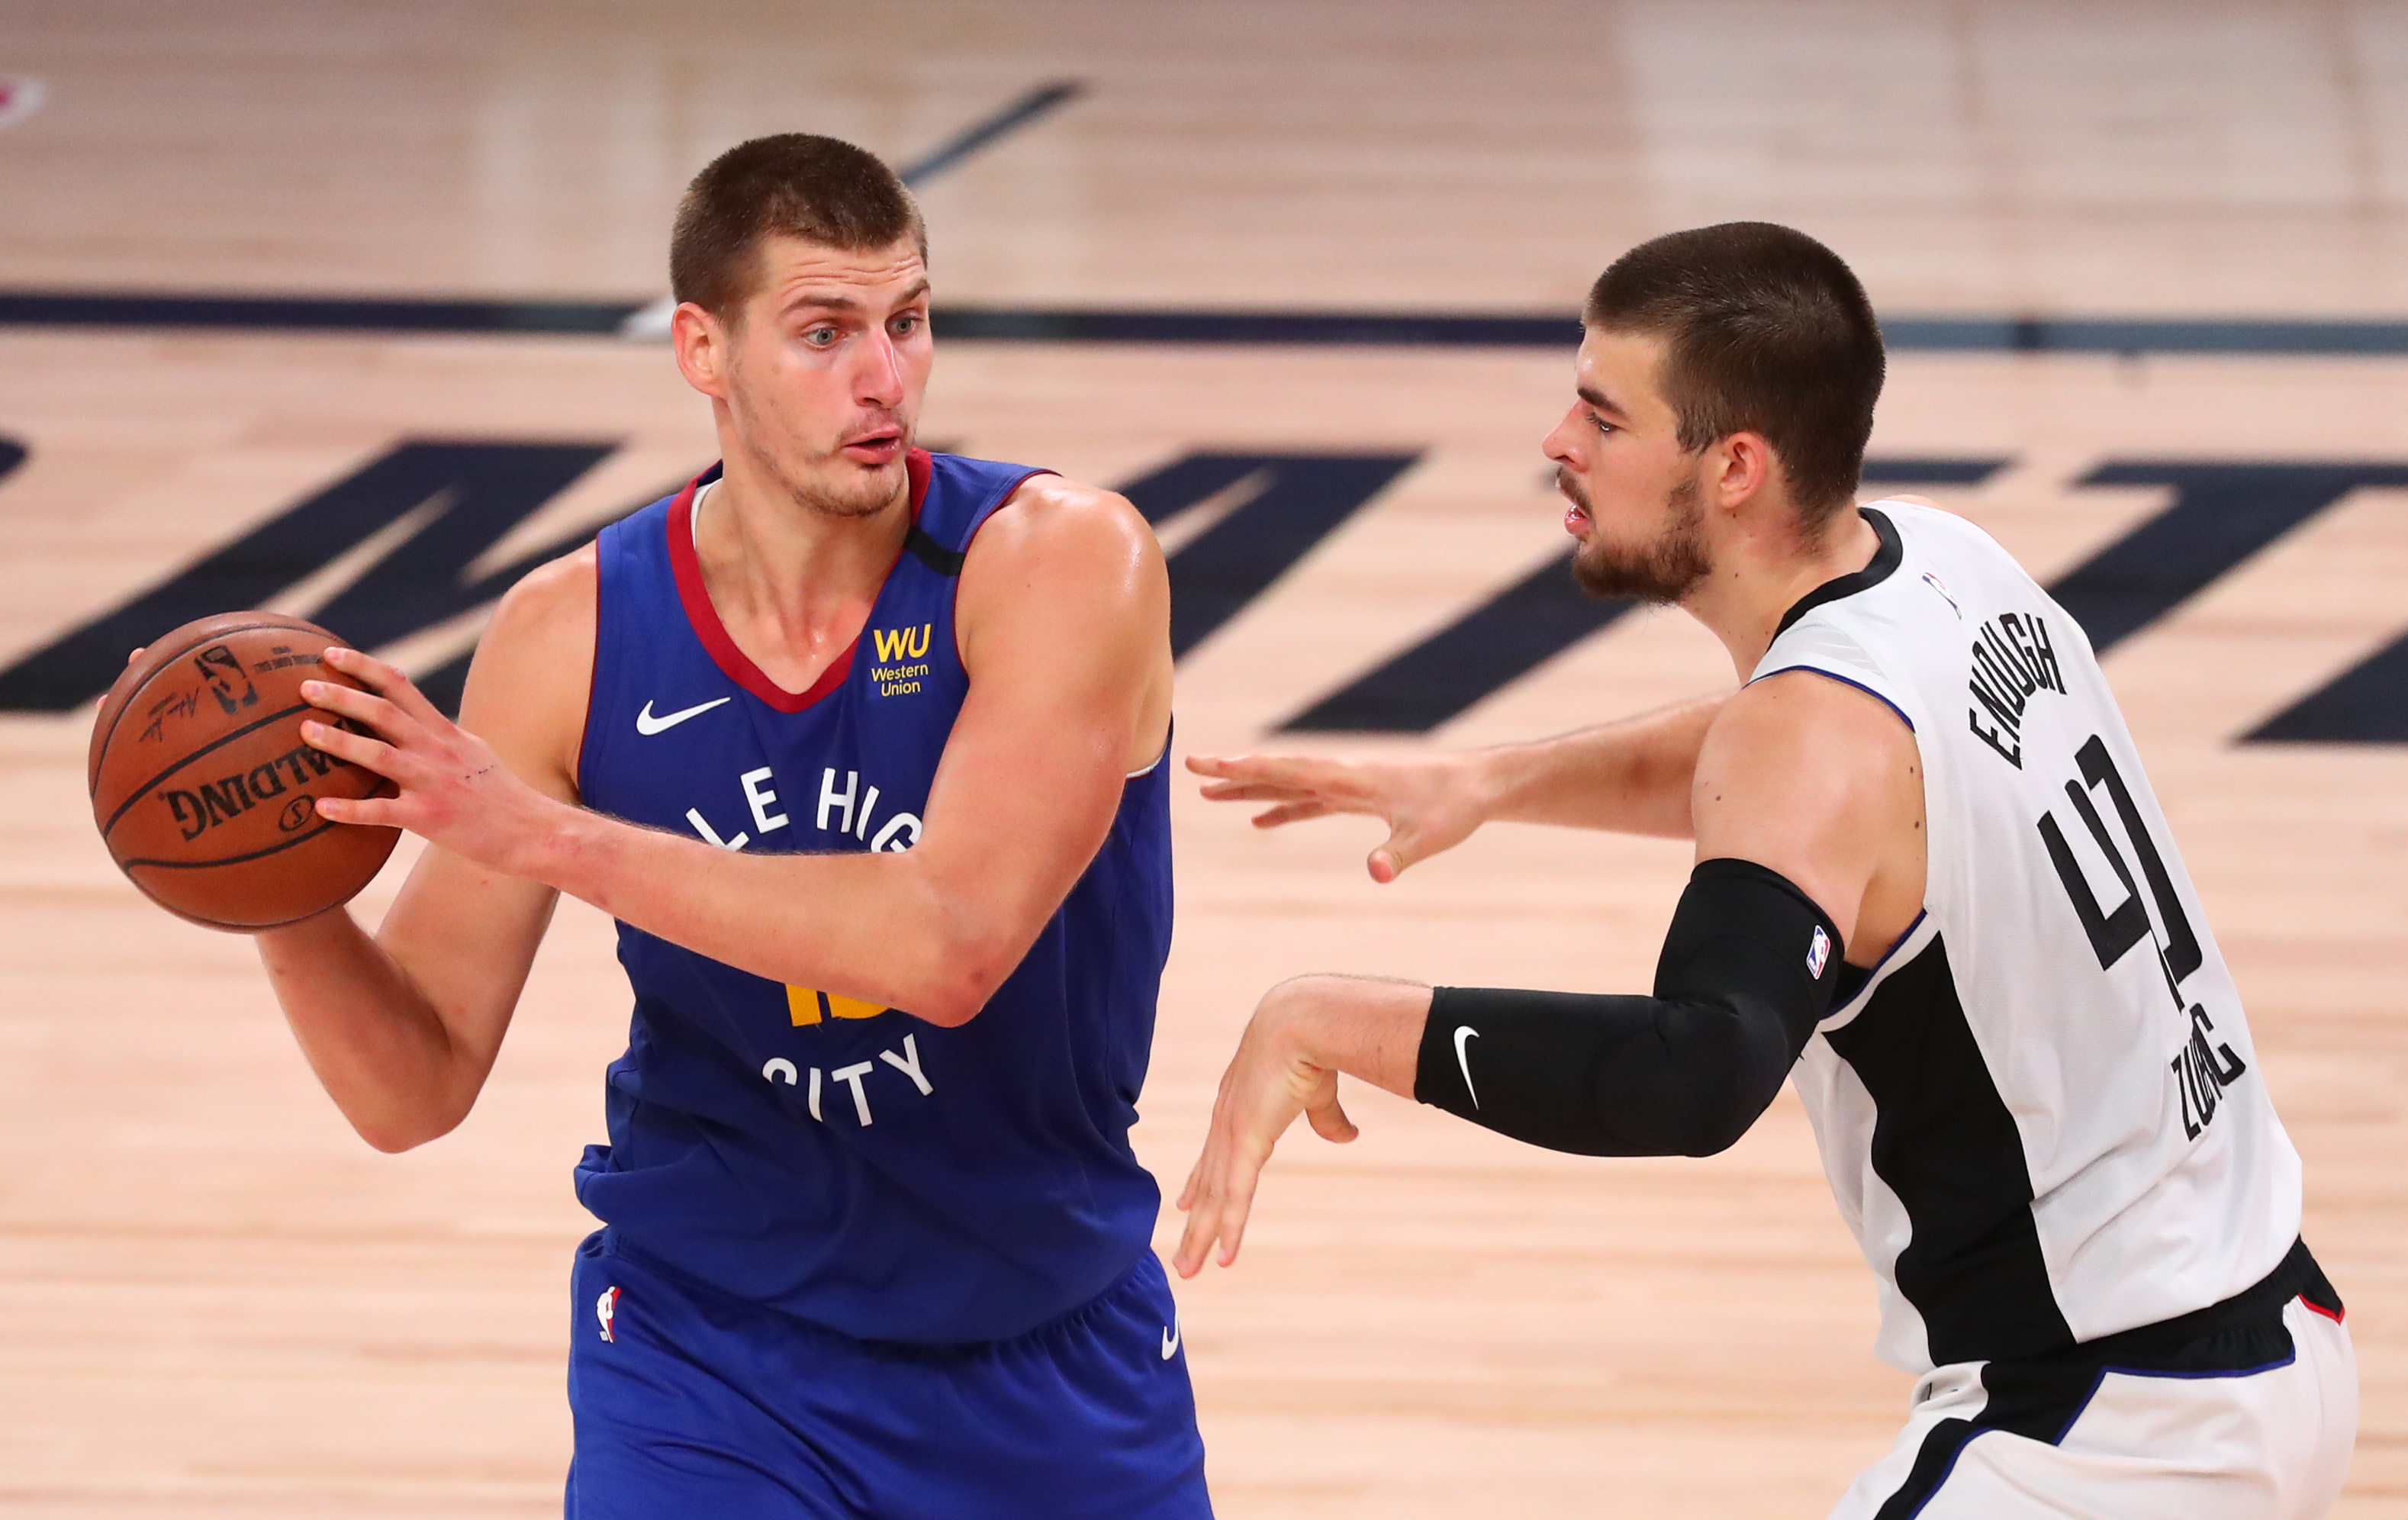 Denver Nuggets center Nikola Jokic (15) is defended by LA Clippers center Ivica Zubac (40) in the third quarter of a NBA basketball game at AdventHealth Arena.